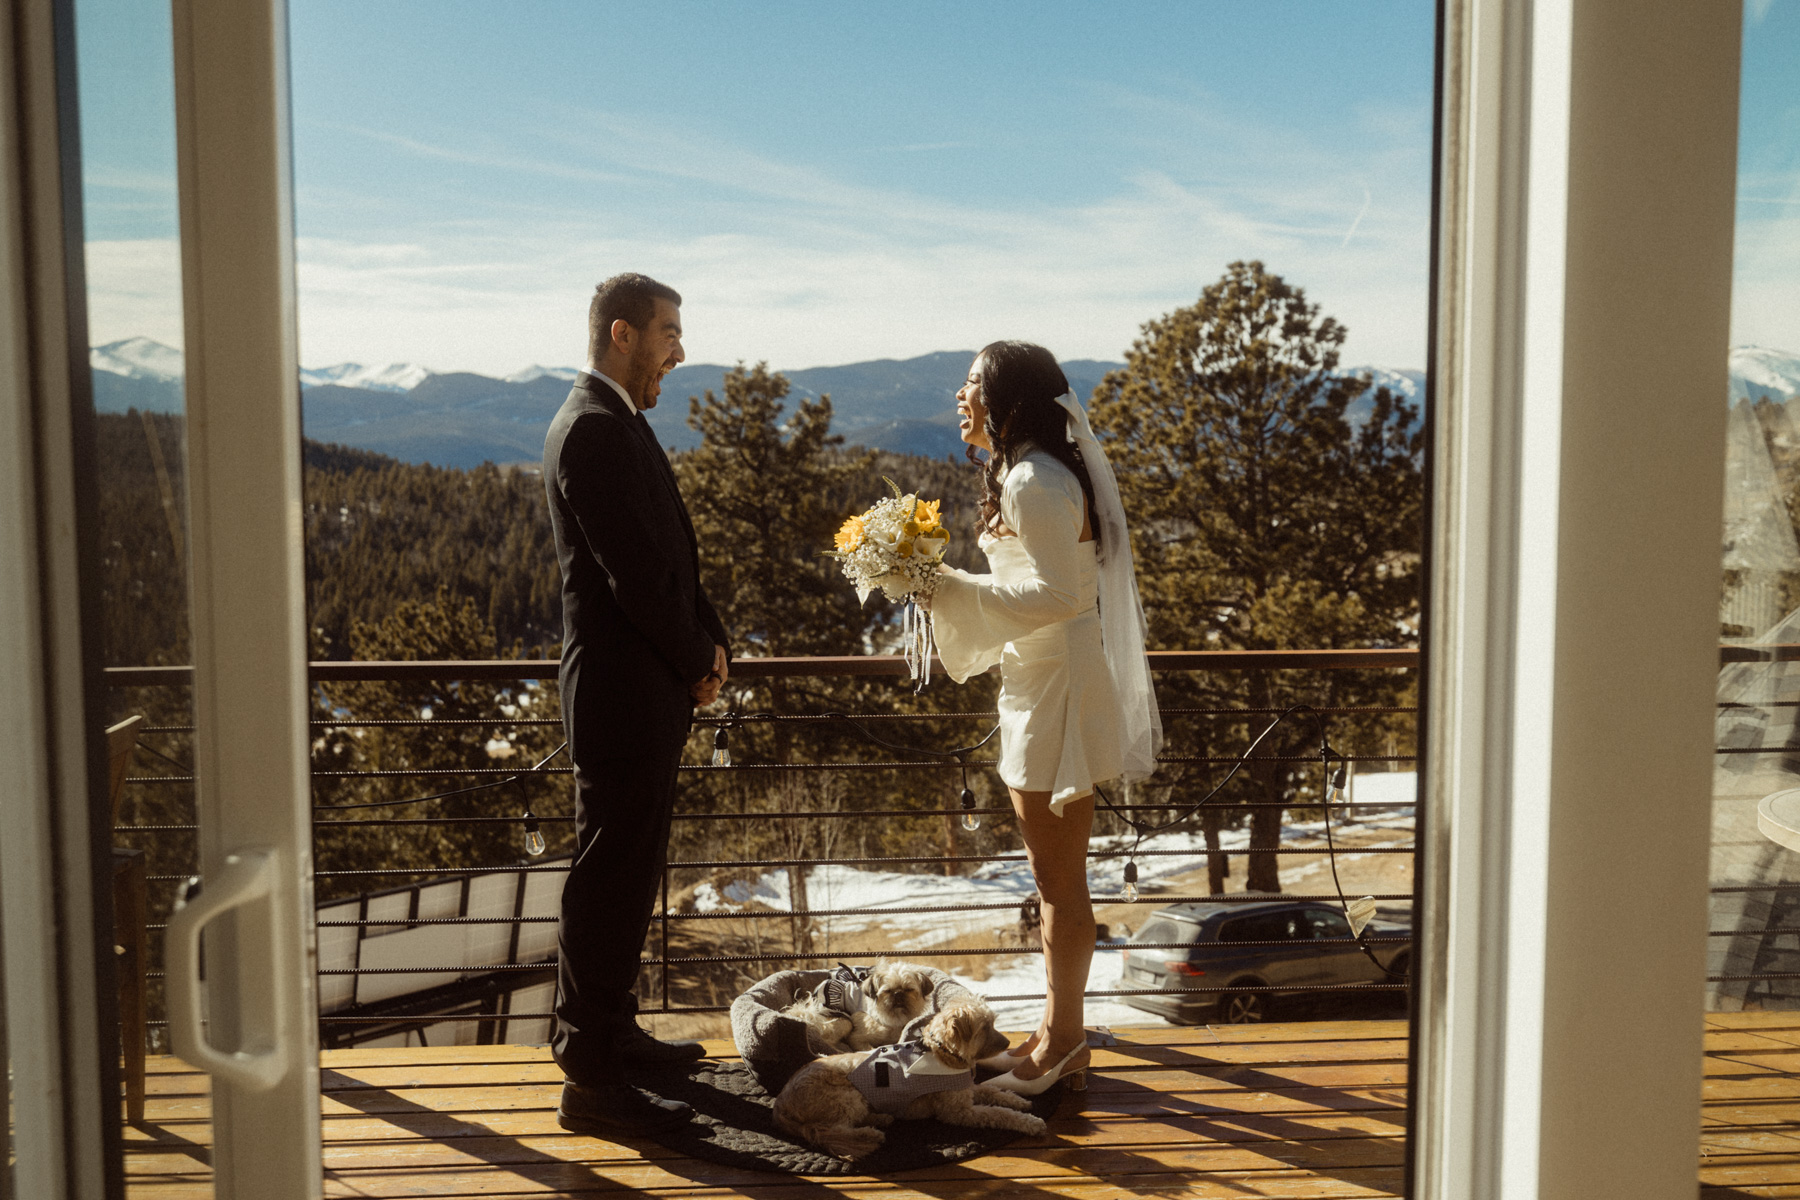 Two people getting married in colorado by self solemnizing on the deck of their airbnb.